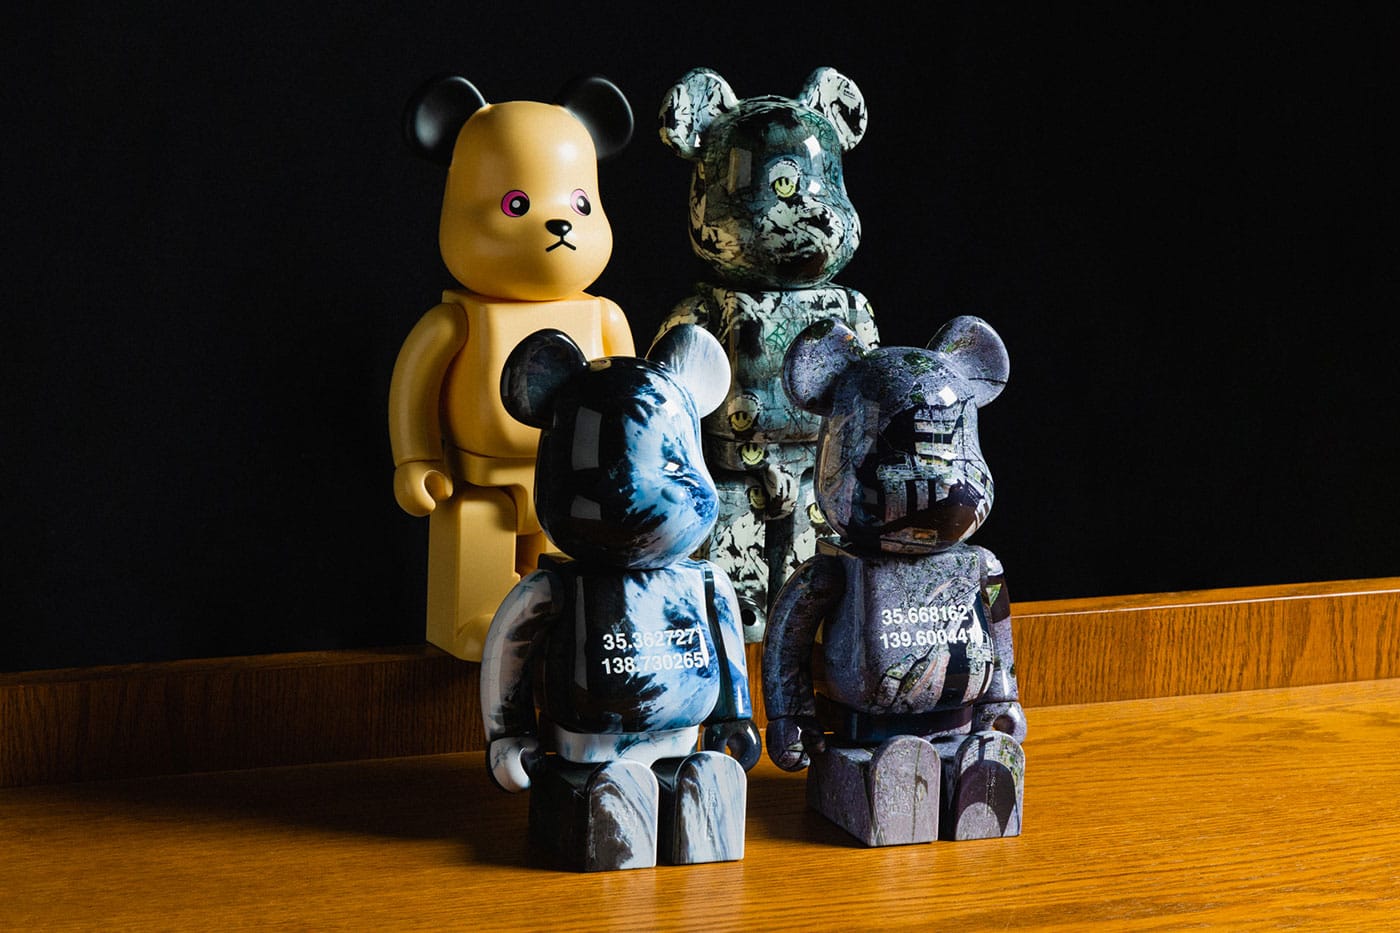 BE@RBRICK Nujabes metaphorical music HBX Release | HYPEBEAST